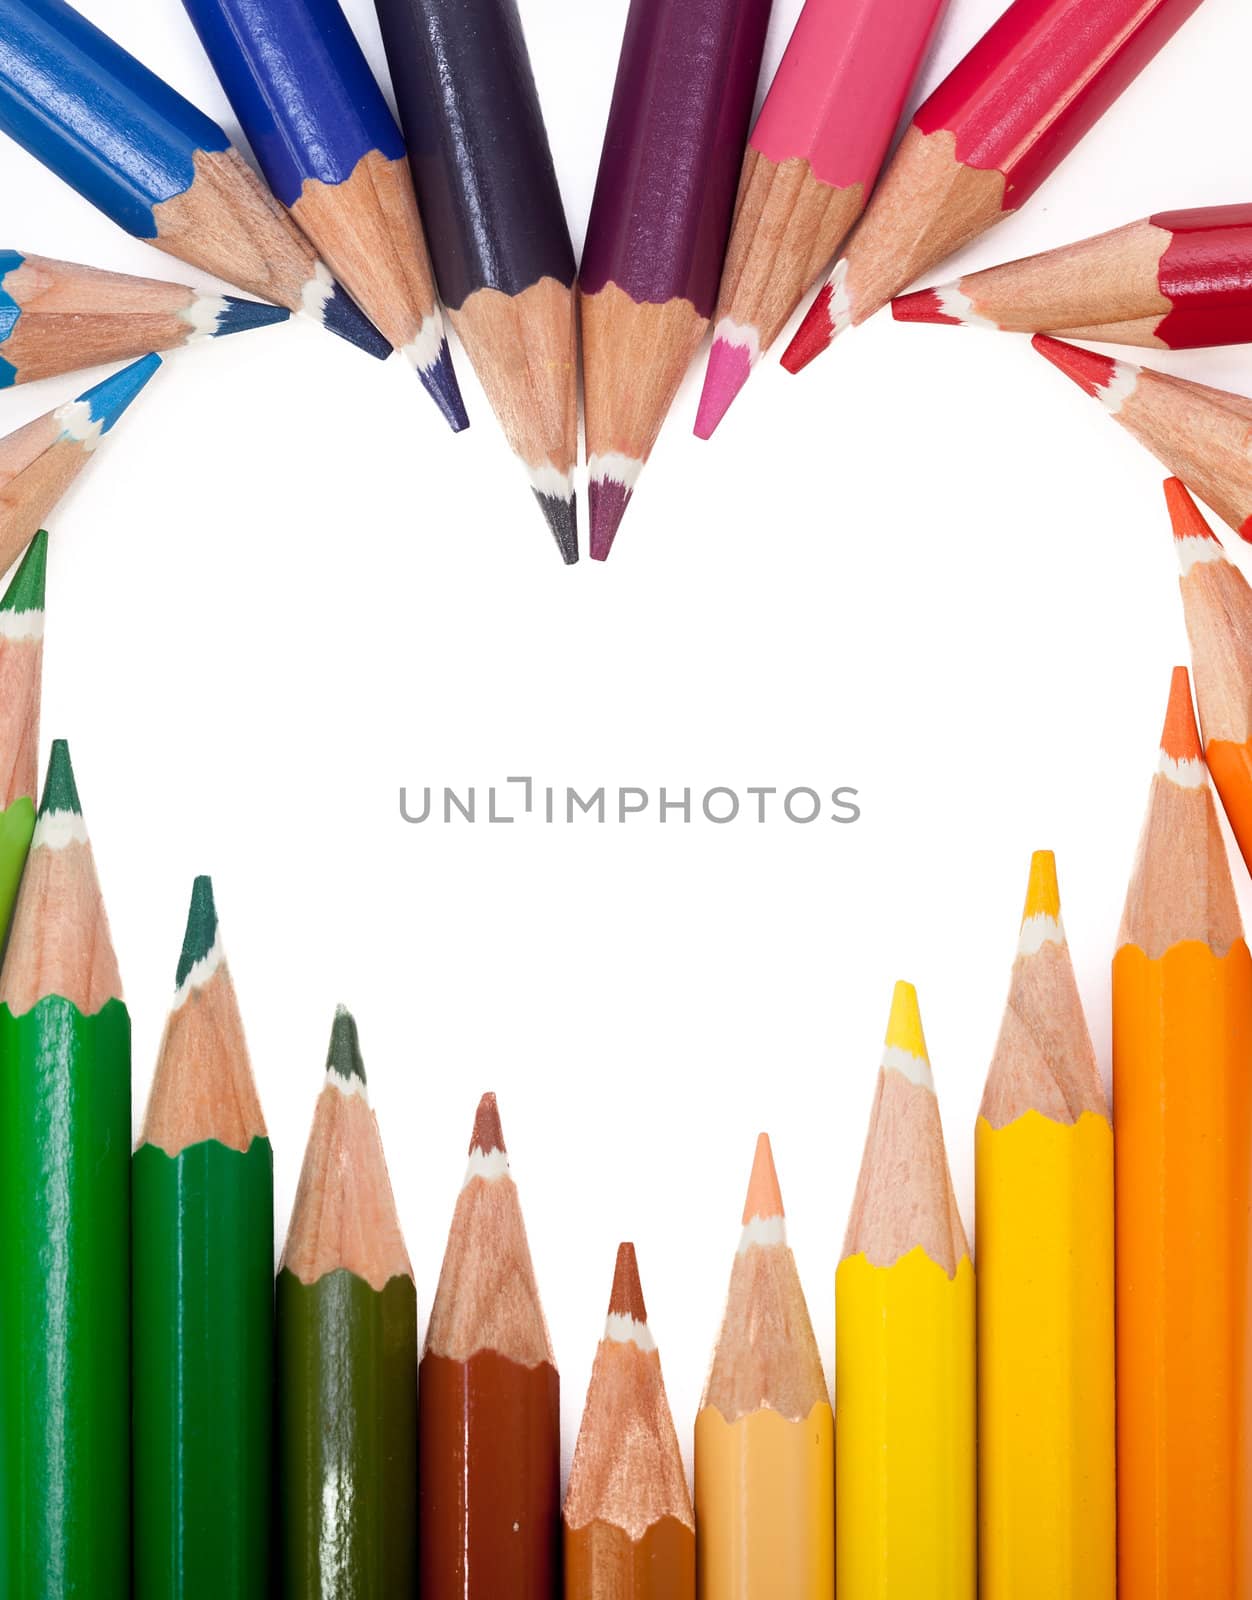 A vivid image with various colored pencils such as yellow, orange, red, pink and blue.